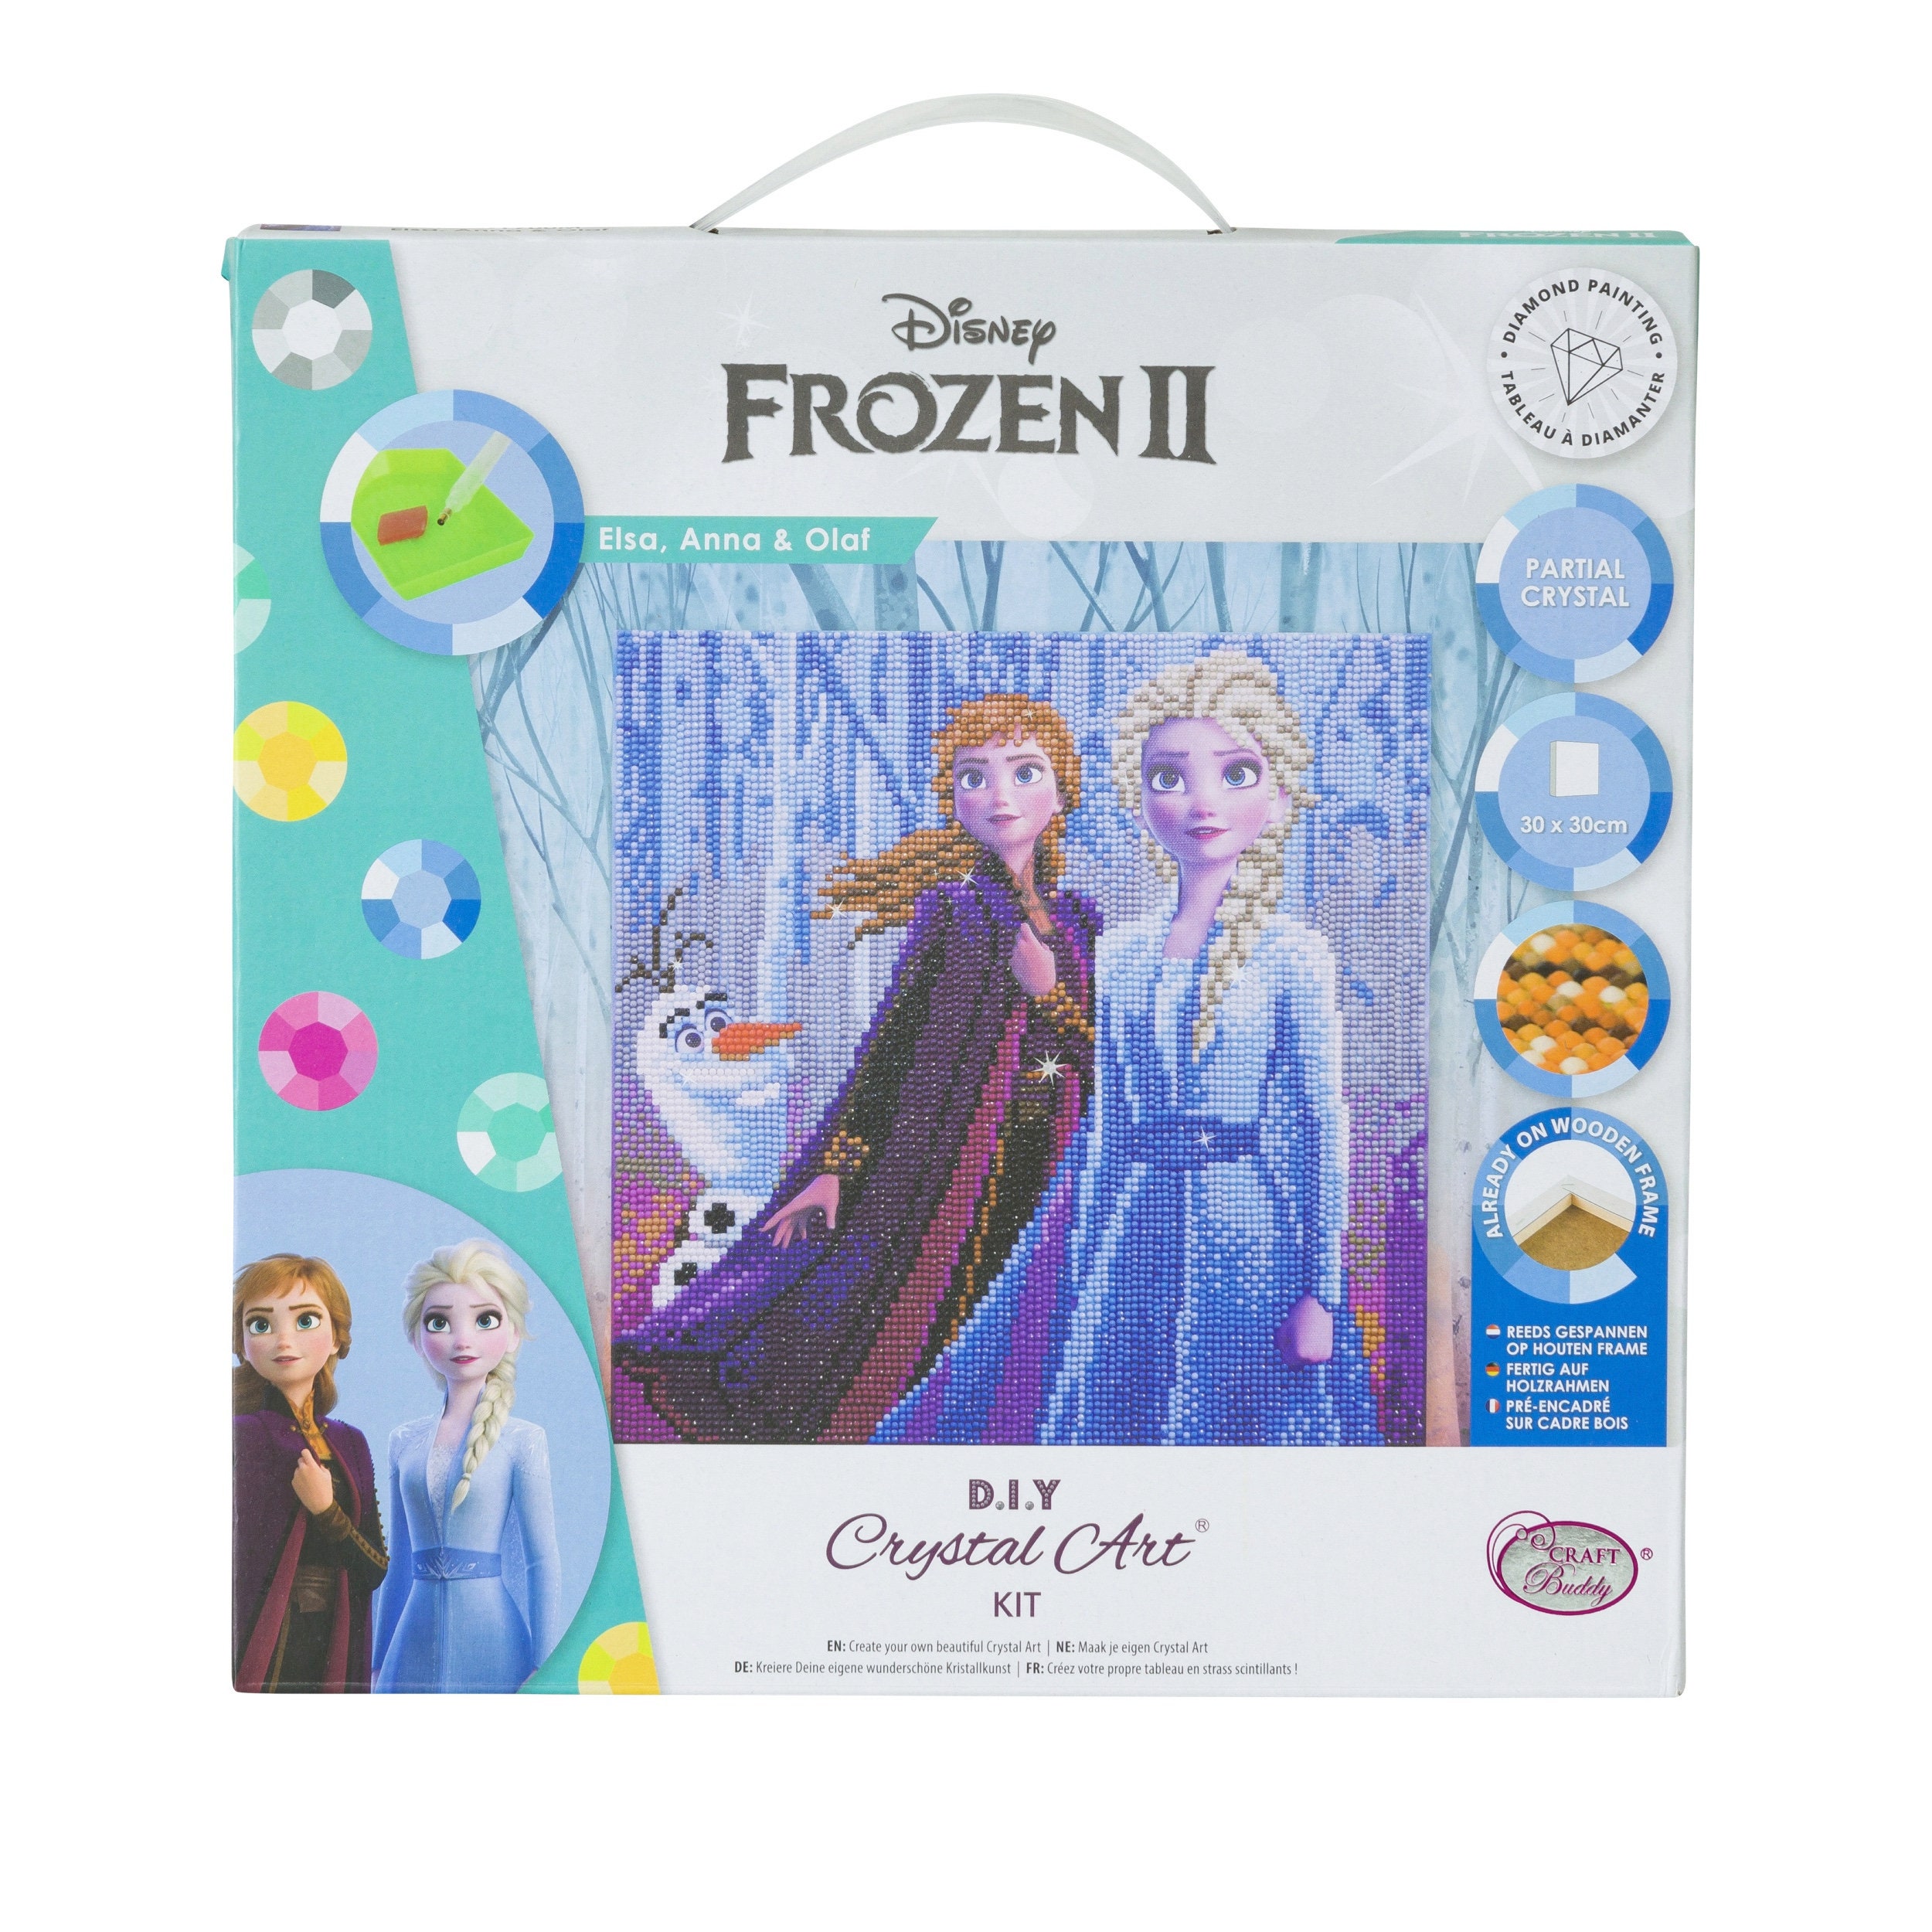 Disney Elsa Anna & Olaf Frozen Crystal Art DIY Picture Kit Ready to Hang  Once Complete, by Craft Buddy, 30 X 30 Cm Like Diamond Painting - Etsy Hong  Kong